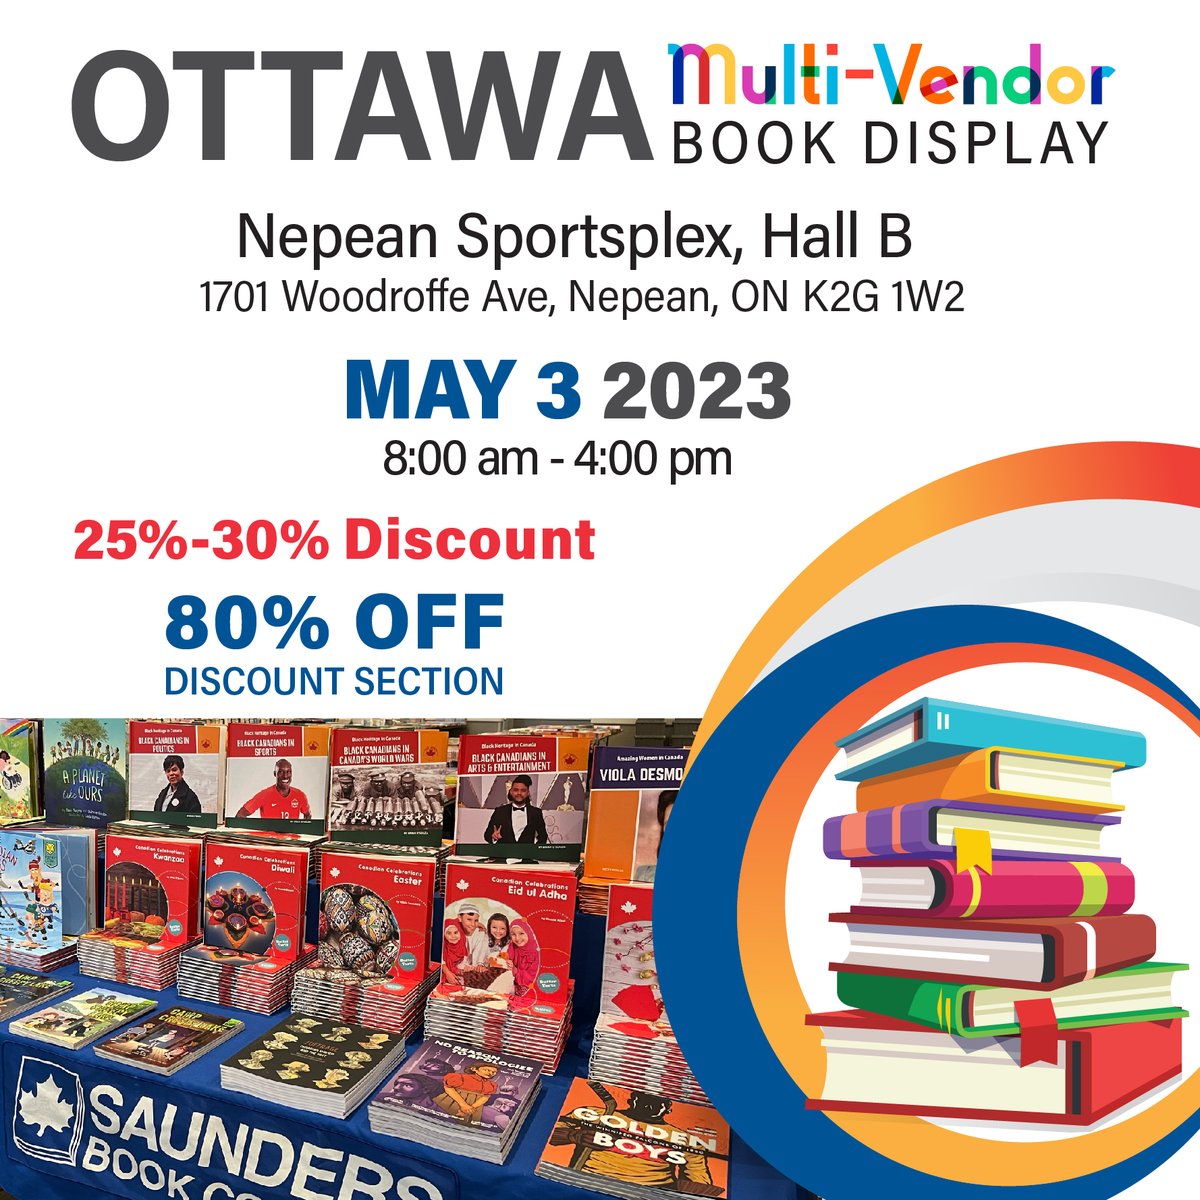 We are coming to Ottawa this Wednesday #BookDisplay